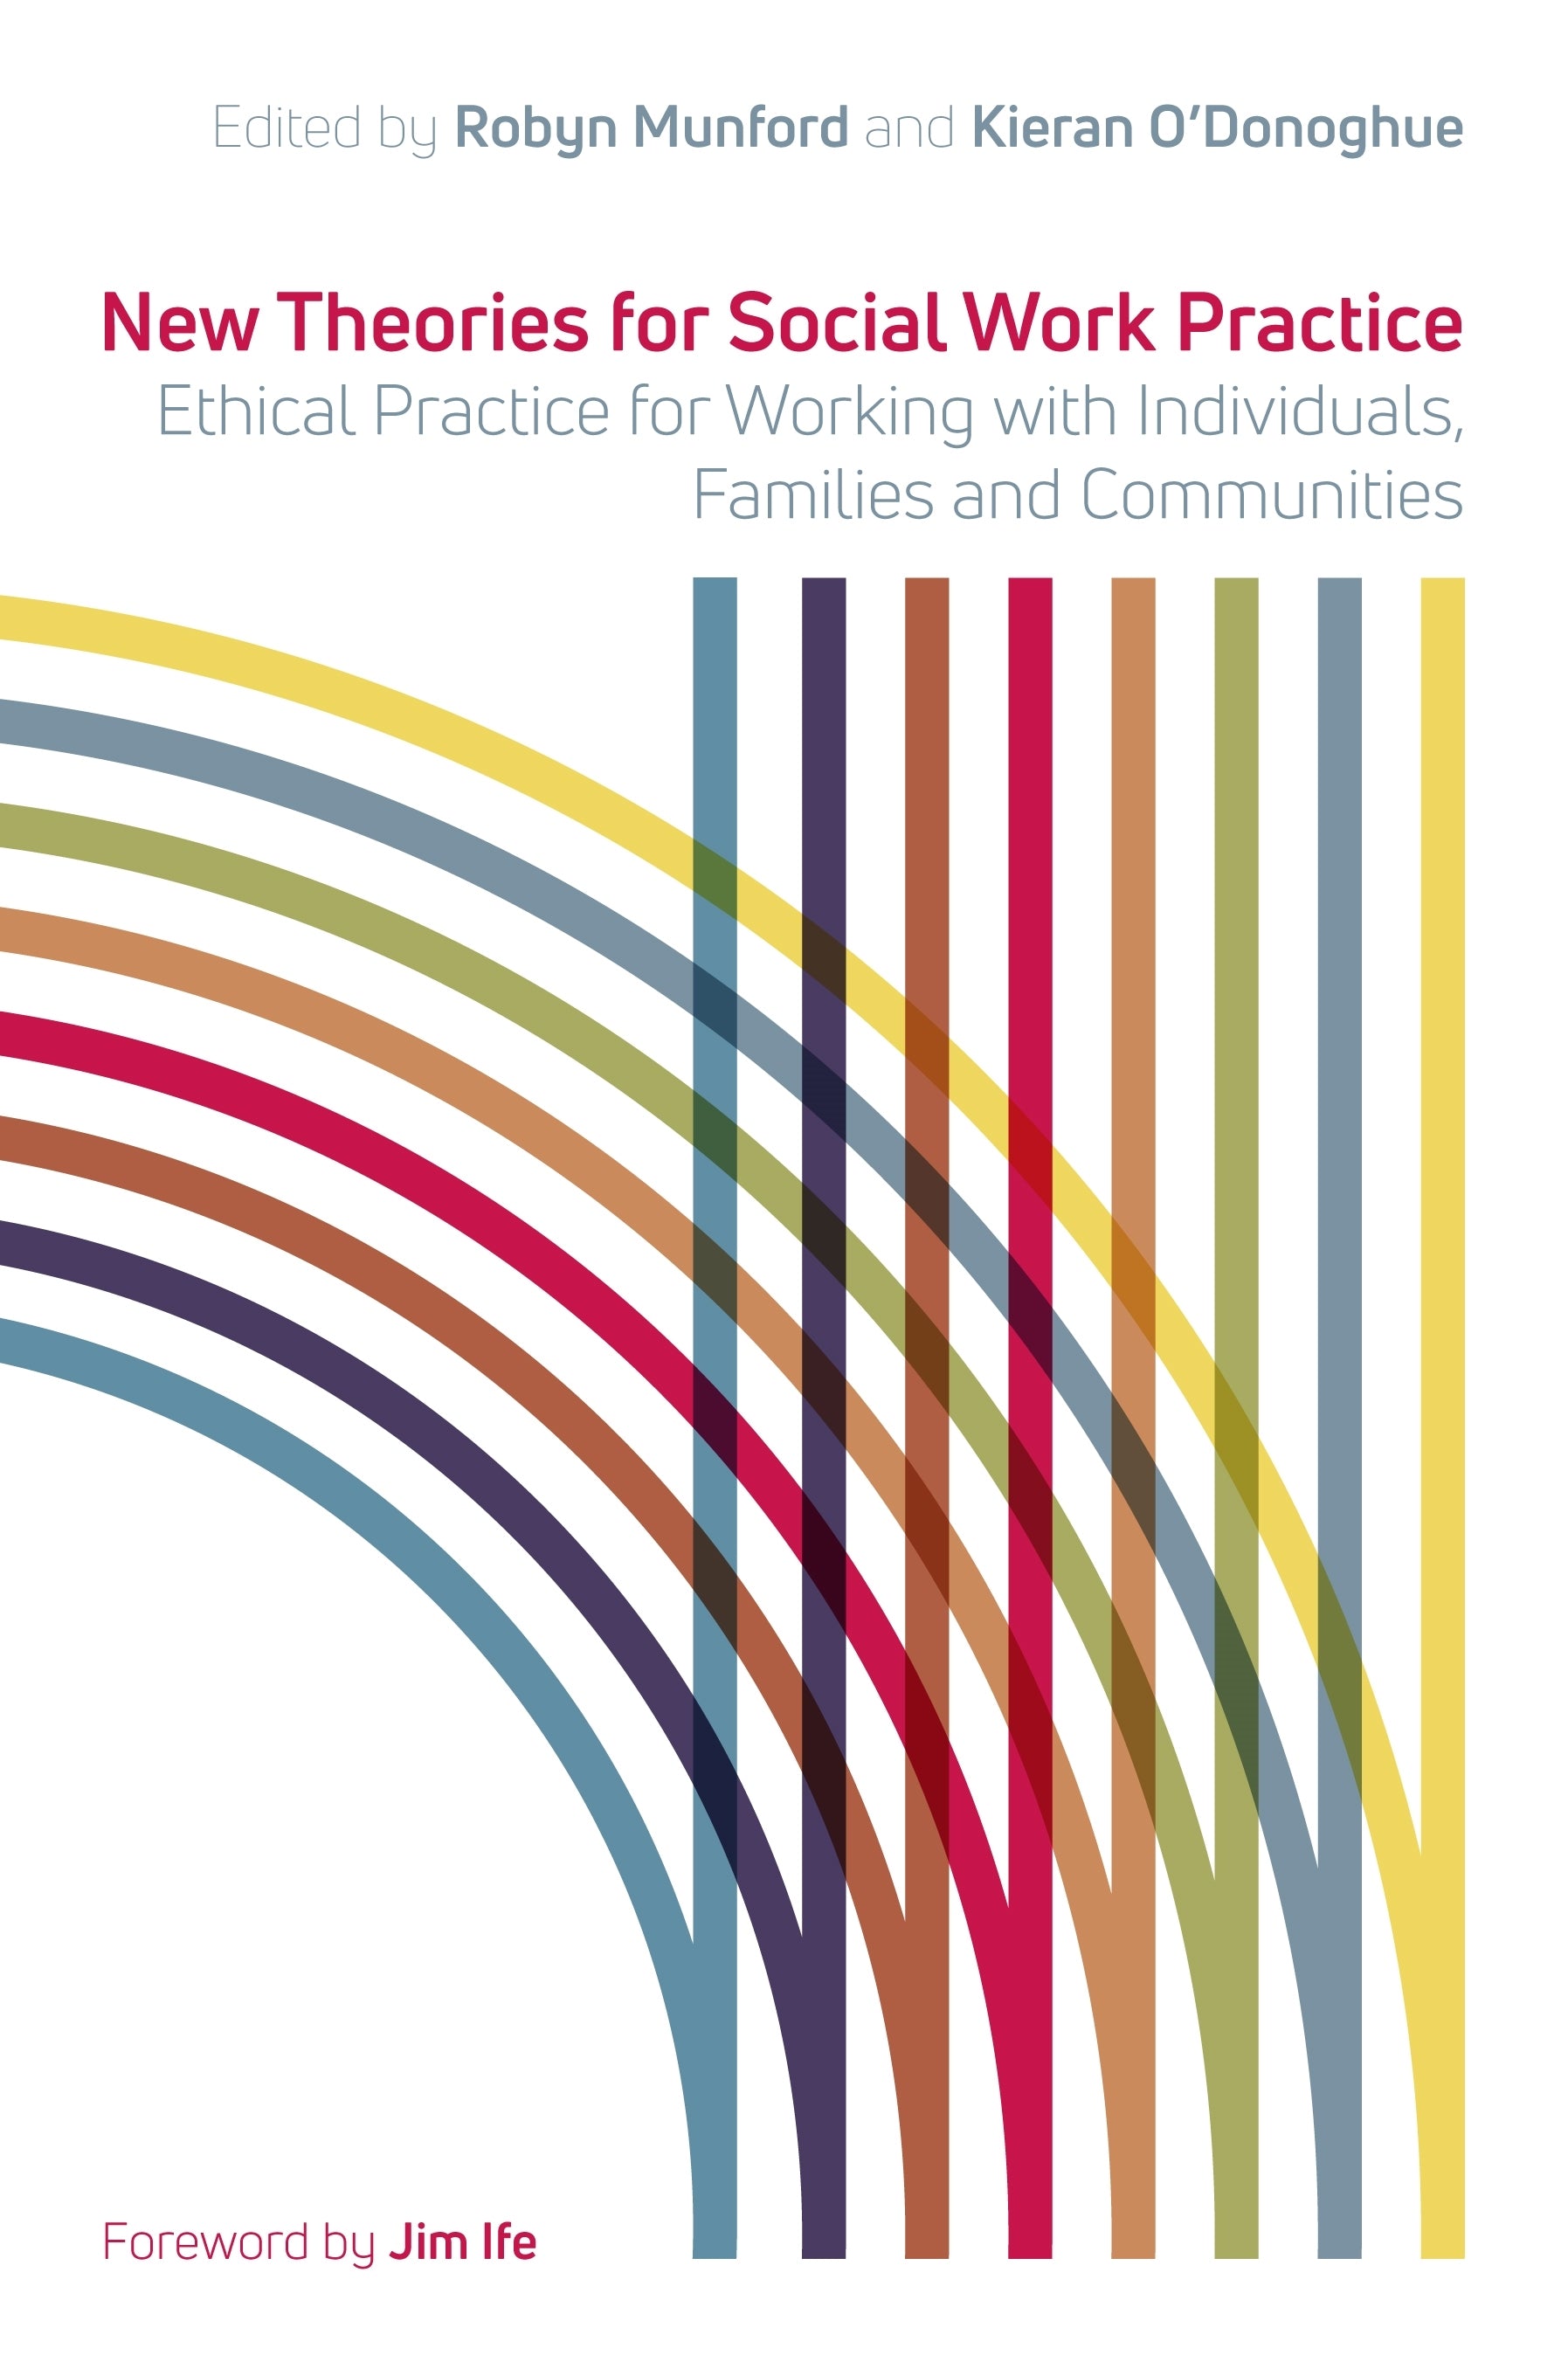 New Theories for Social Work Practice by No Author Listed, Robyn Munford, Kieran O'Donoghue, Jim Ife